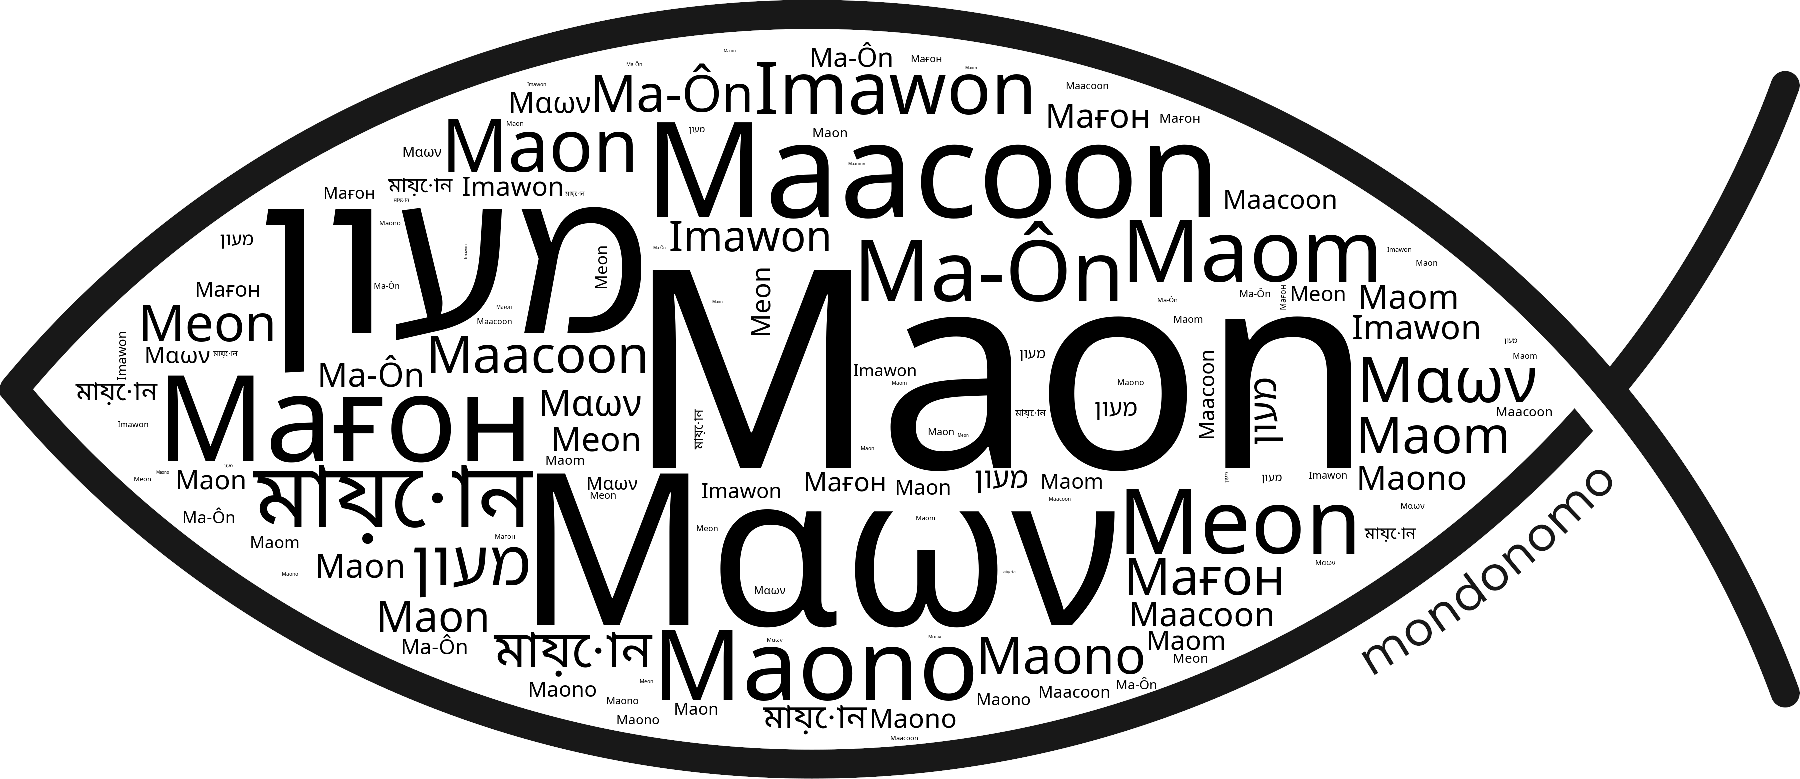 Name Maon in the world's Bibles